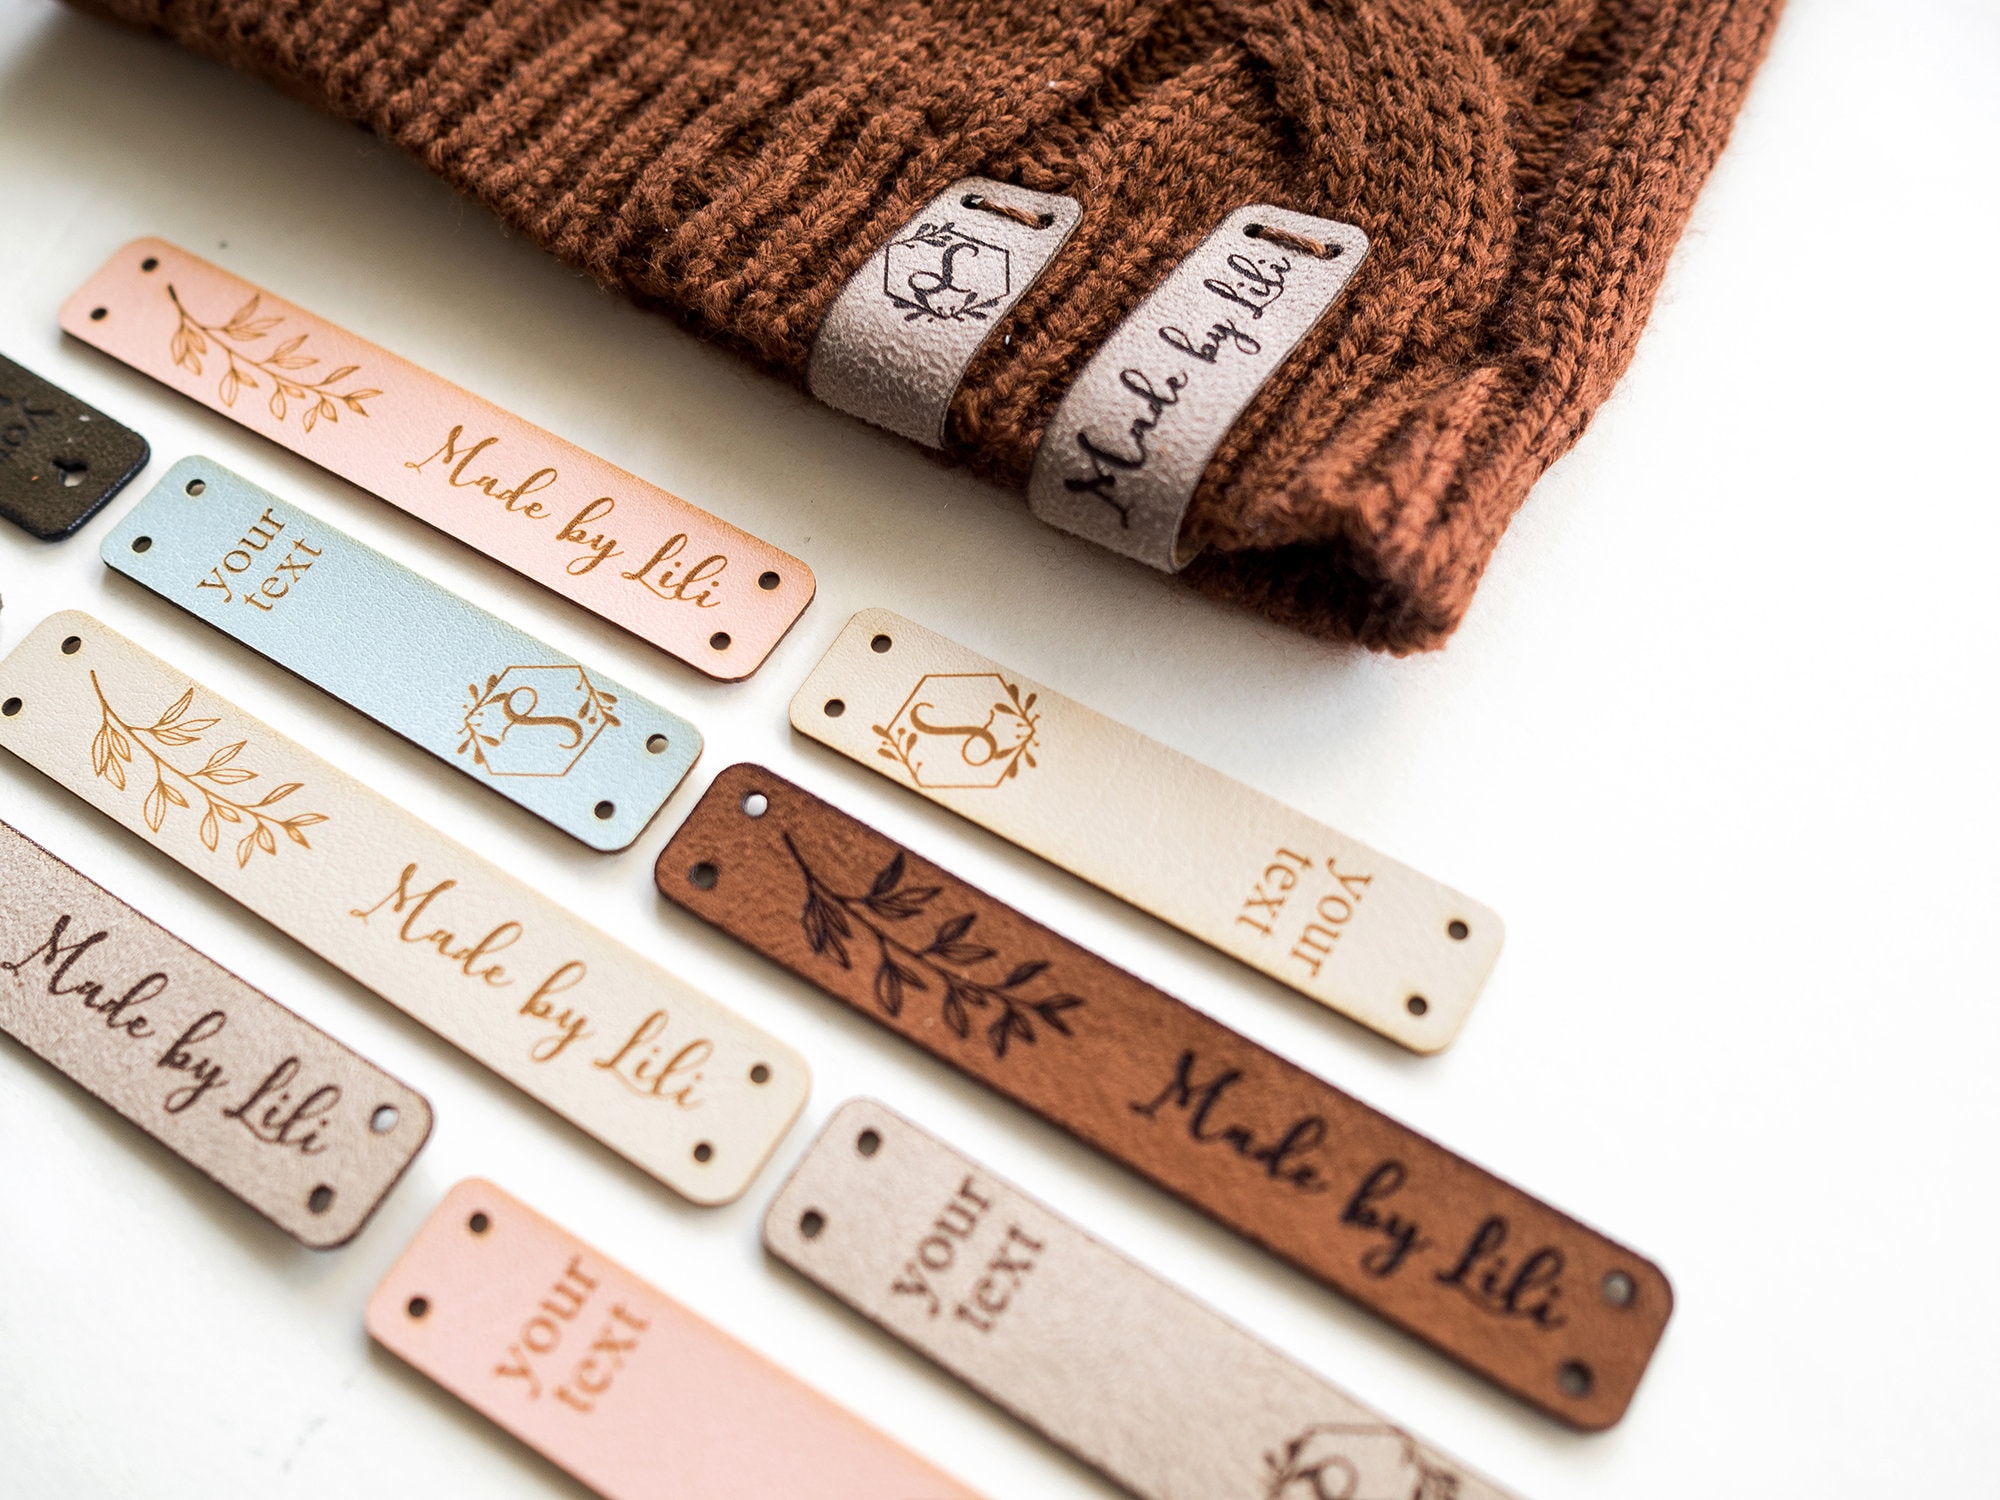 Labels for handmade items, leather tags for handmade items